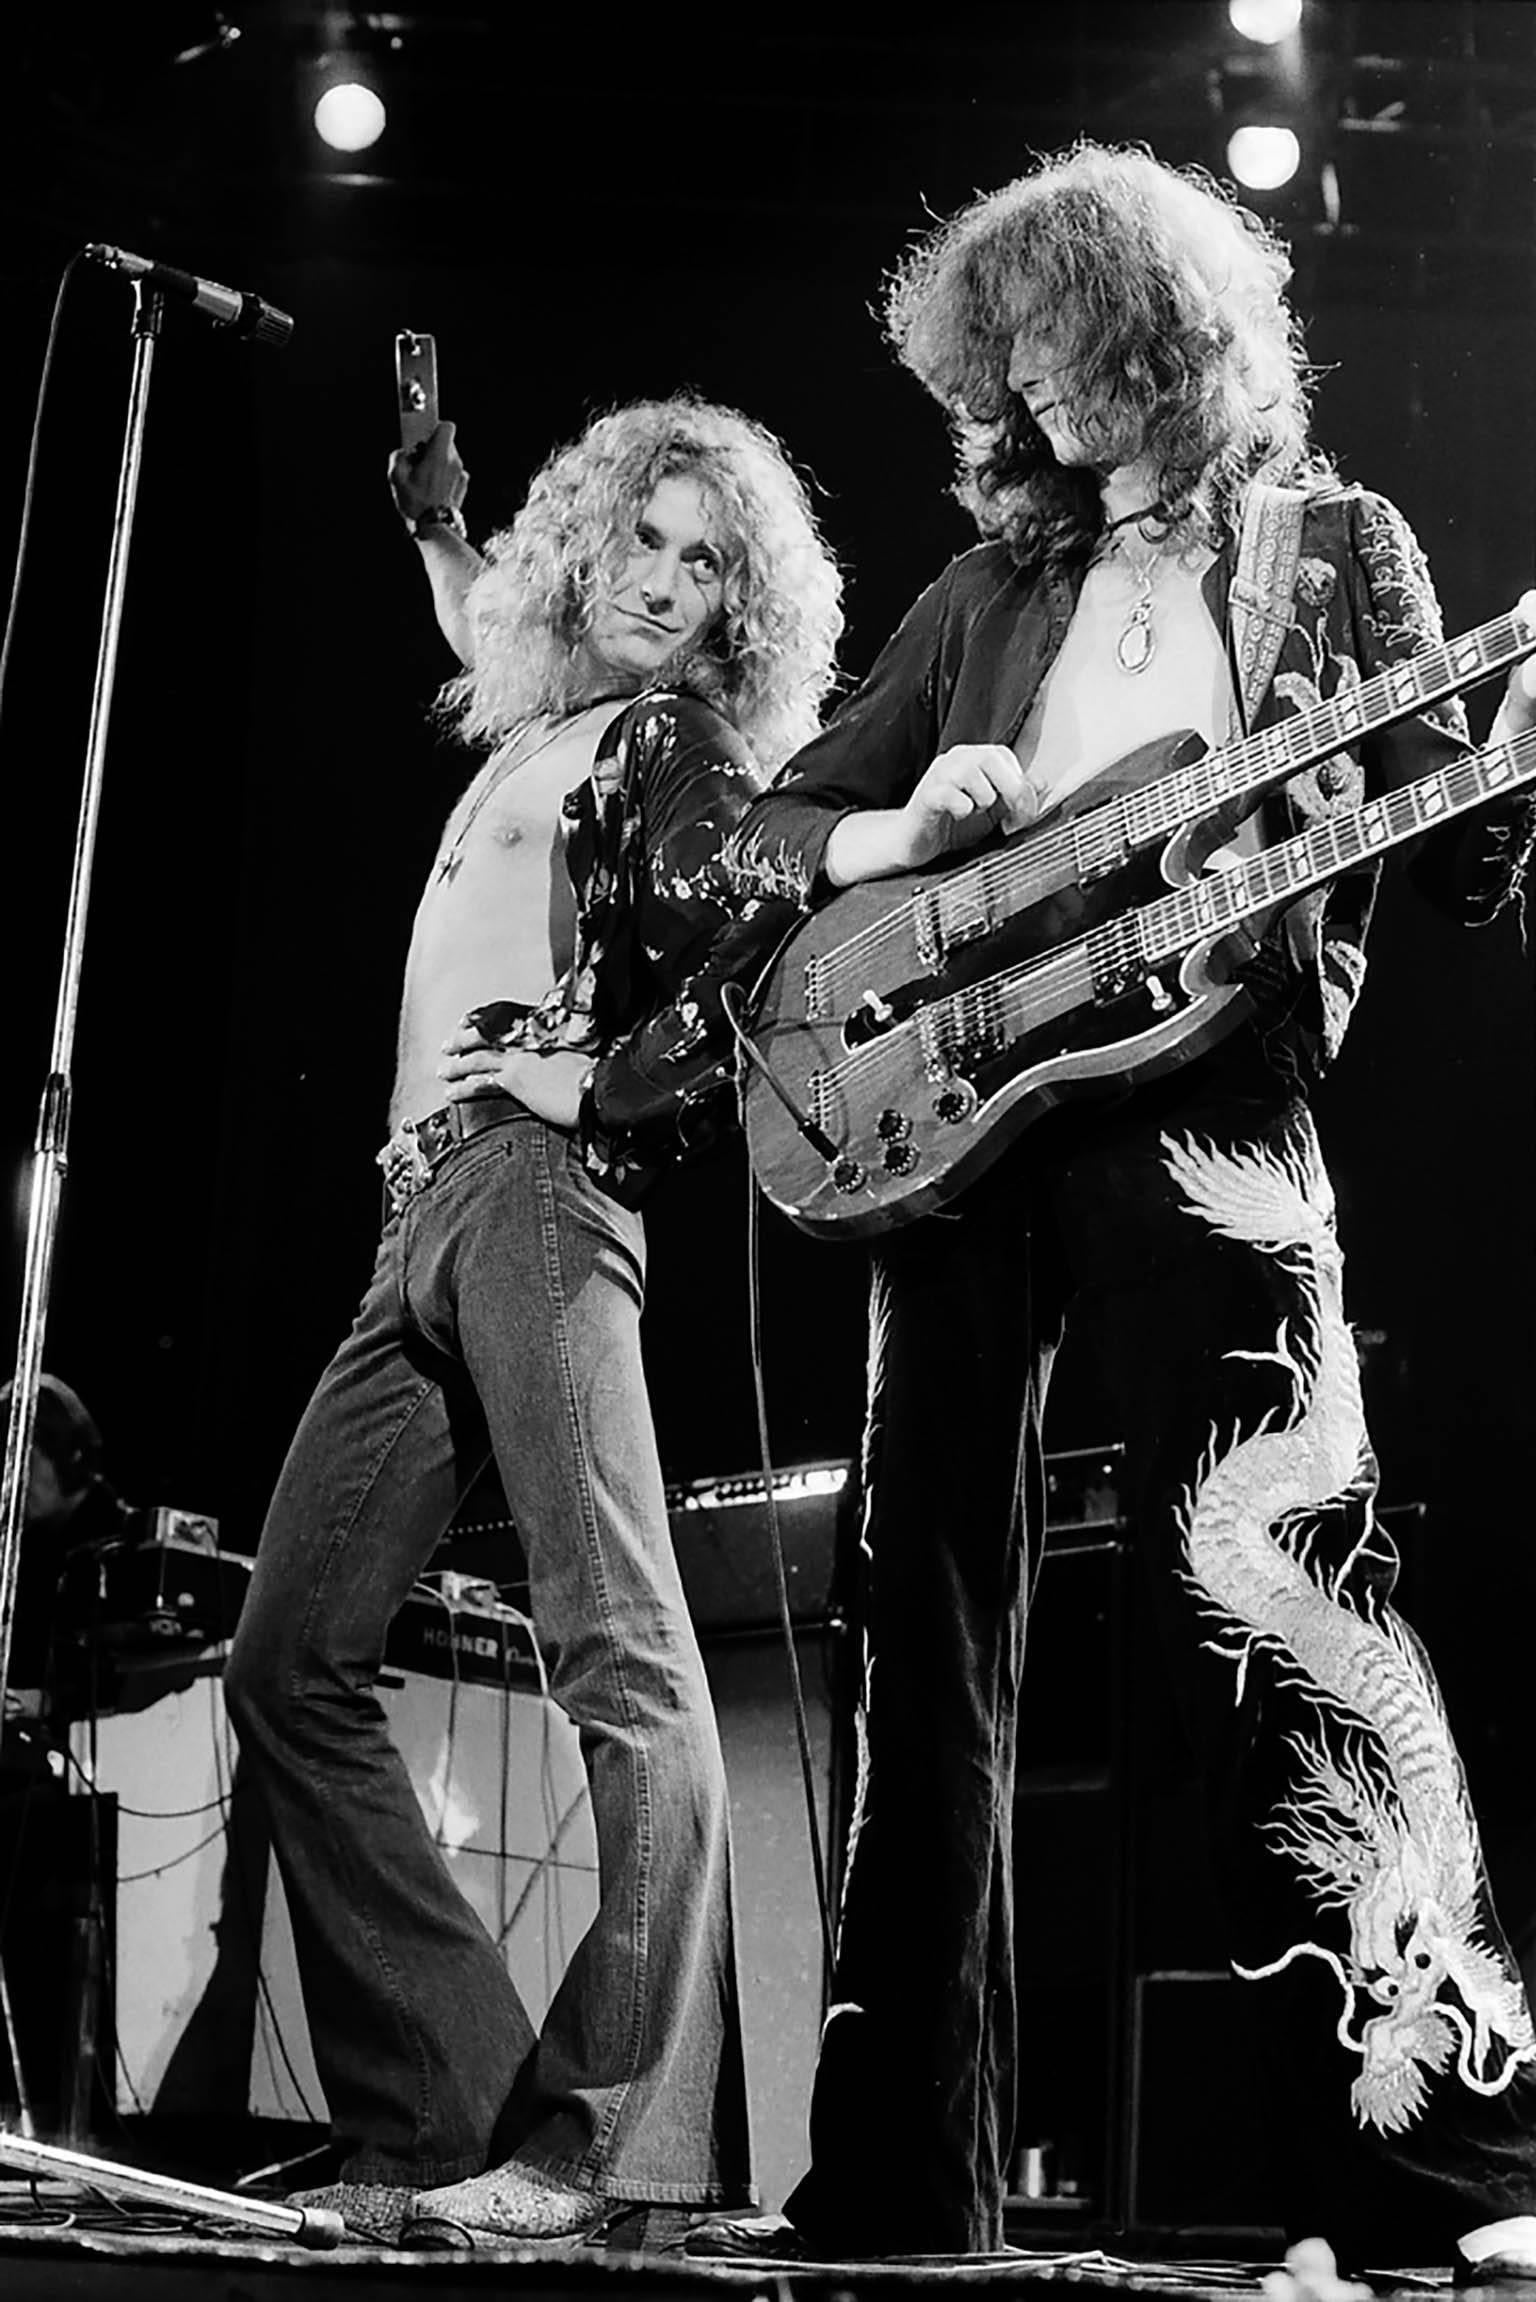 $1.00   4x6 inch   Original  photo    LED ZEPPELIN   JIMMY PAGE   ROBERT PLANT 